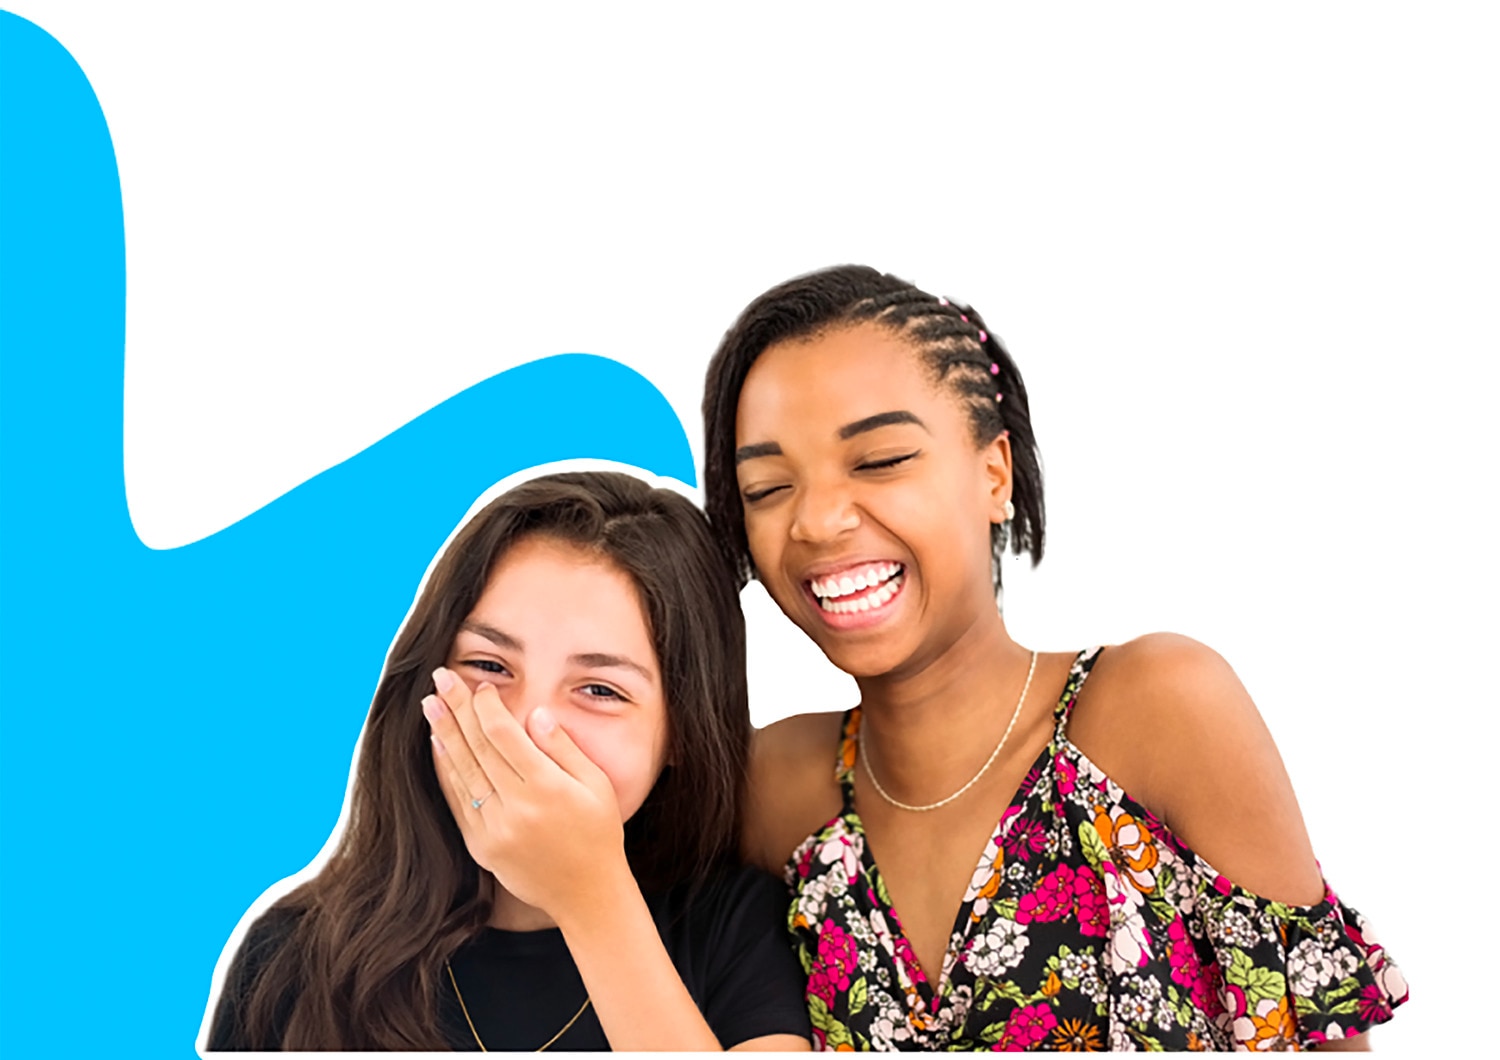 Two young girls laughing together, one of them is covering her mouth with her hand